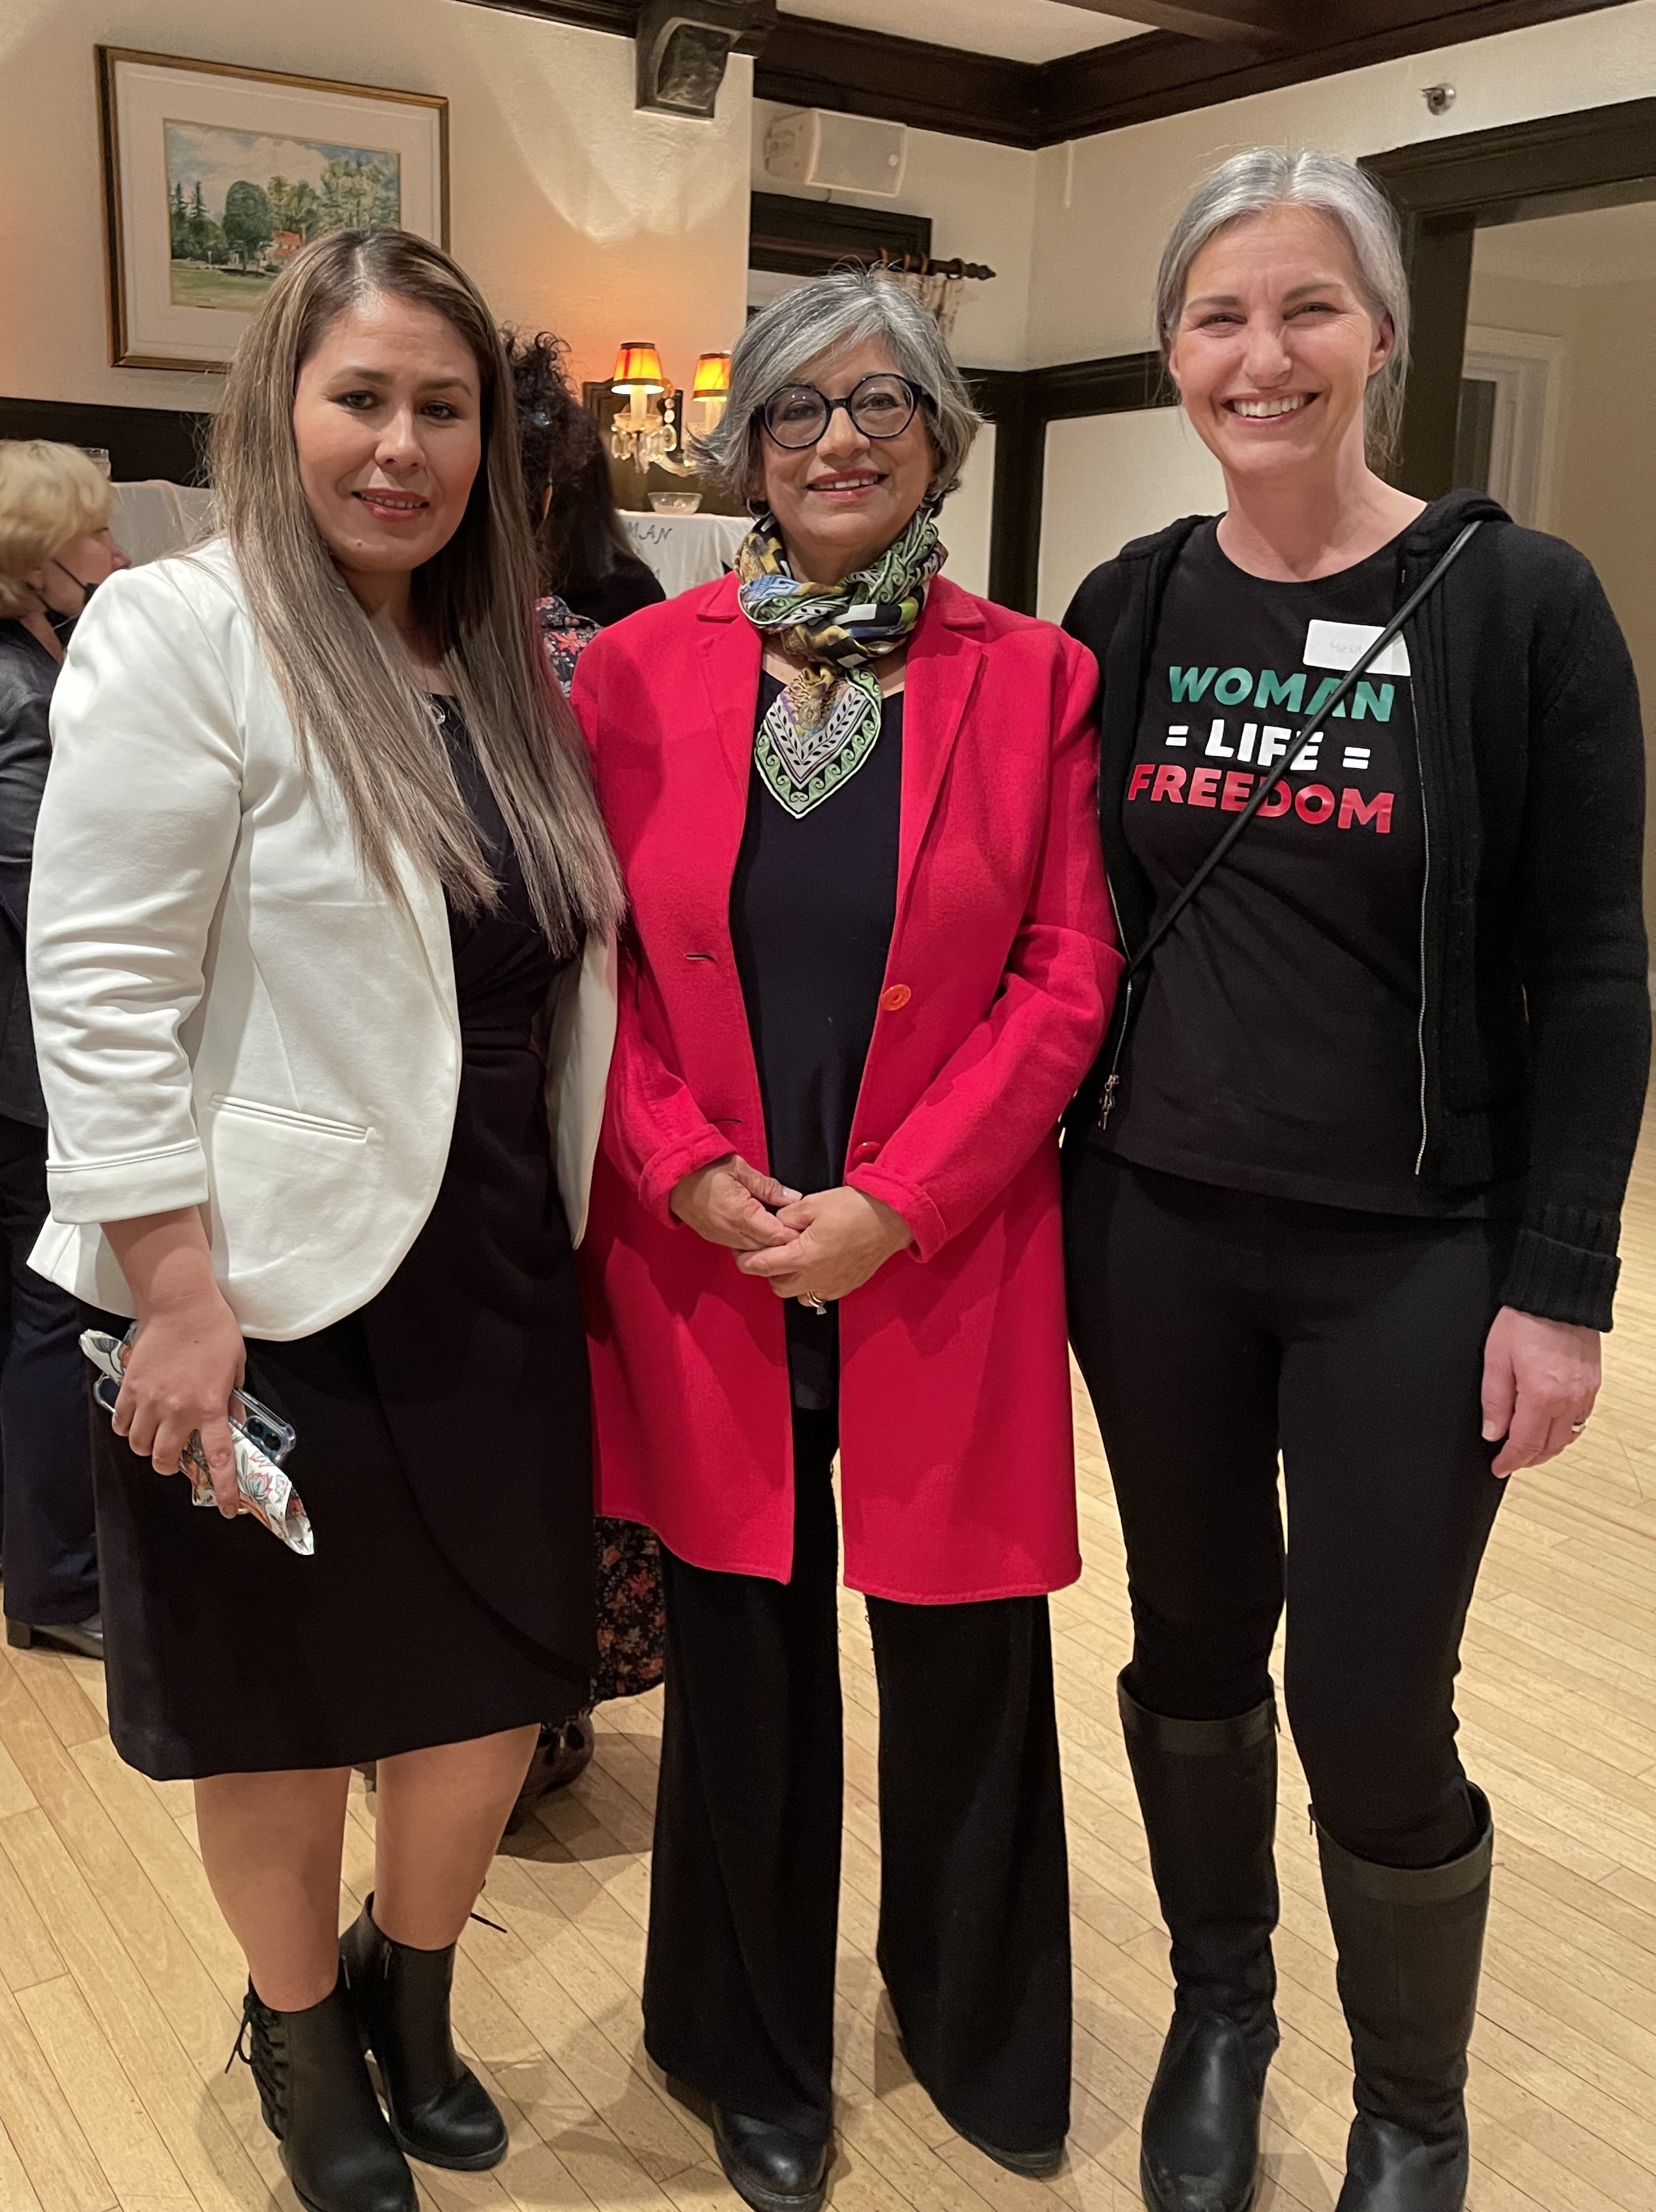 Pictured left to right are Professor Shariff, Ms Amiry, and the Mayor of Baie-D'Urfé, Heidi Ektvedt.